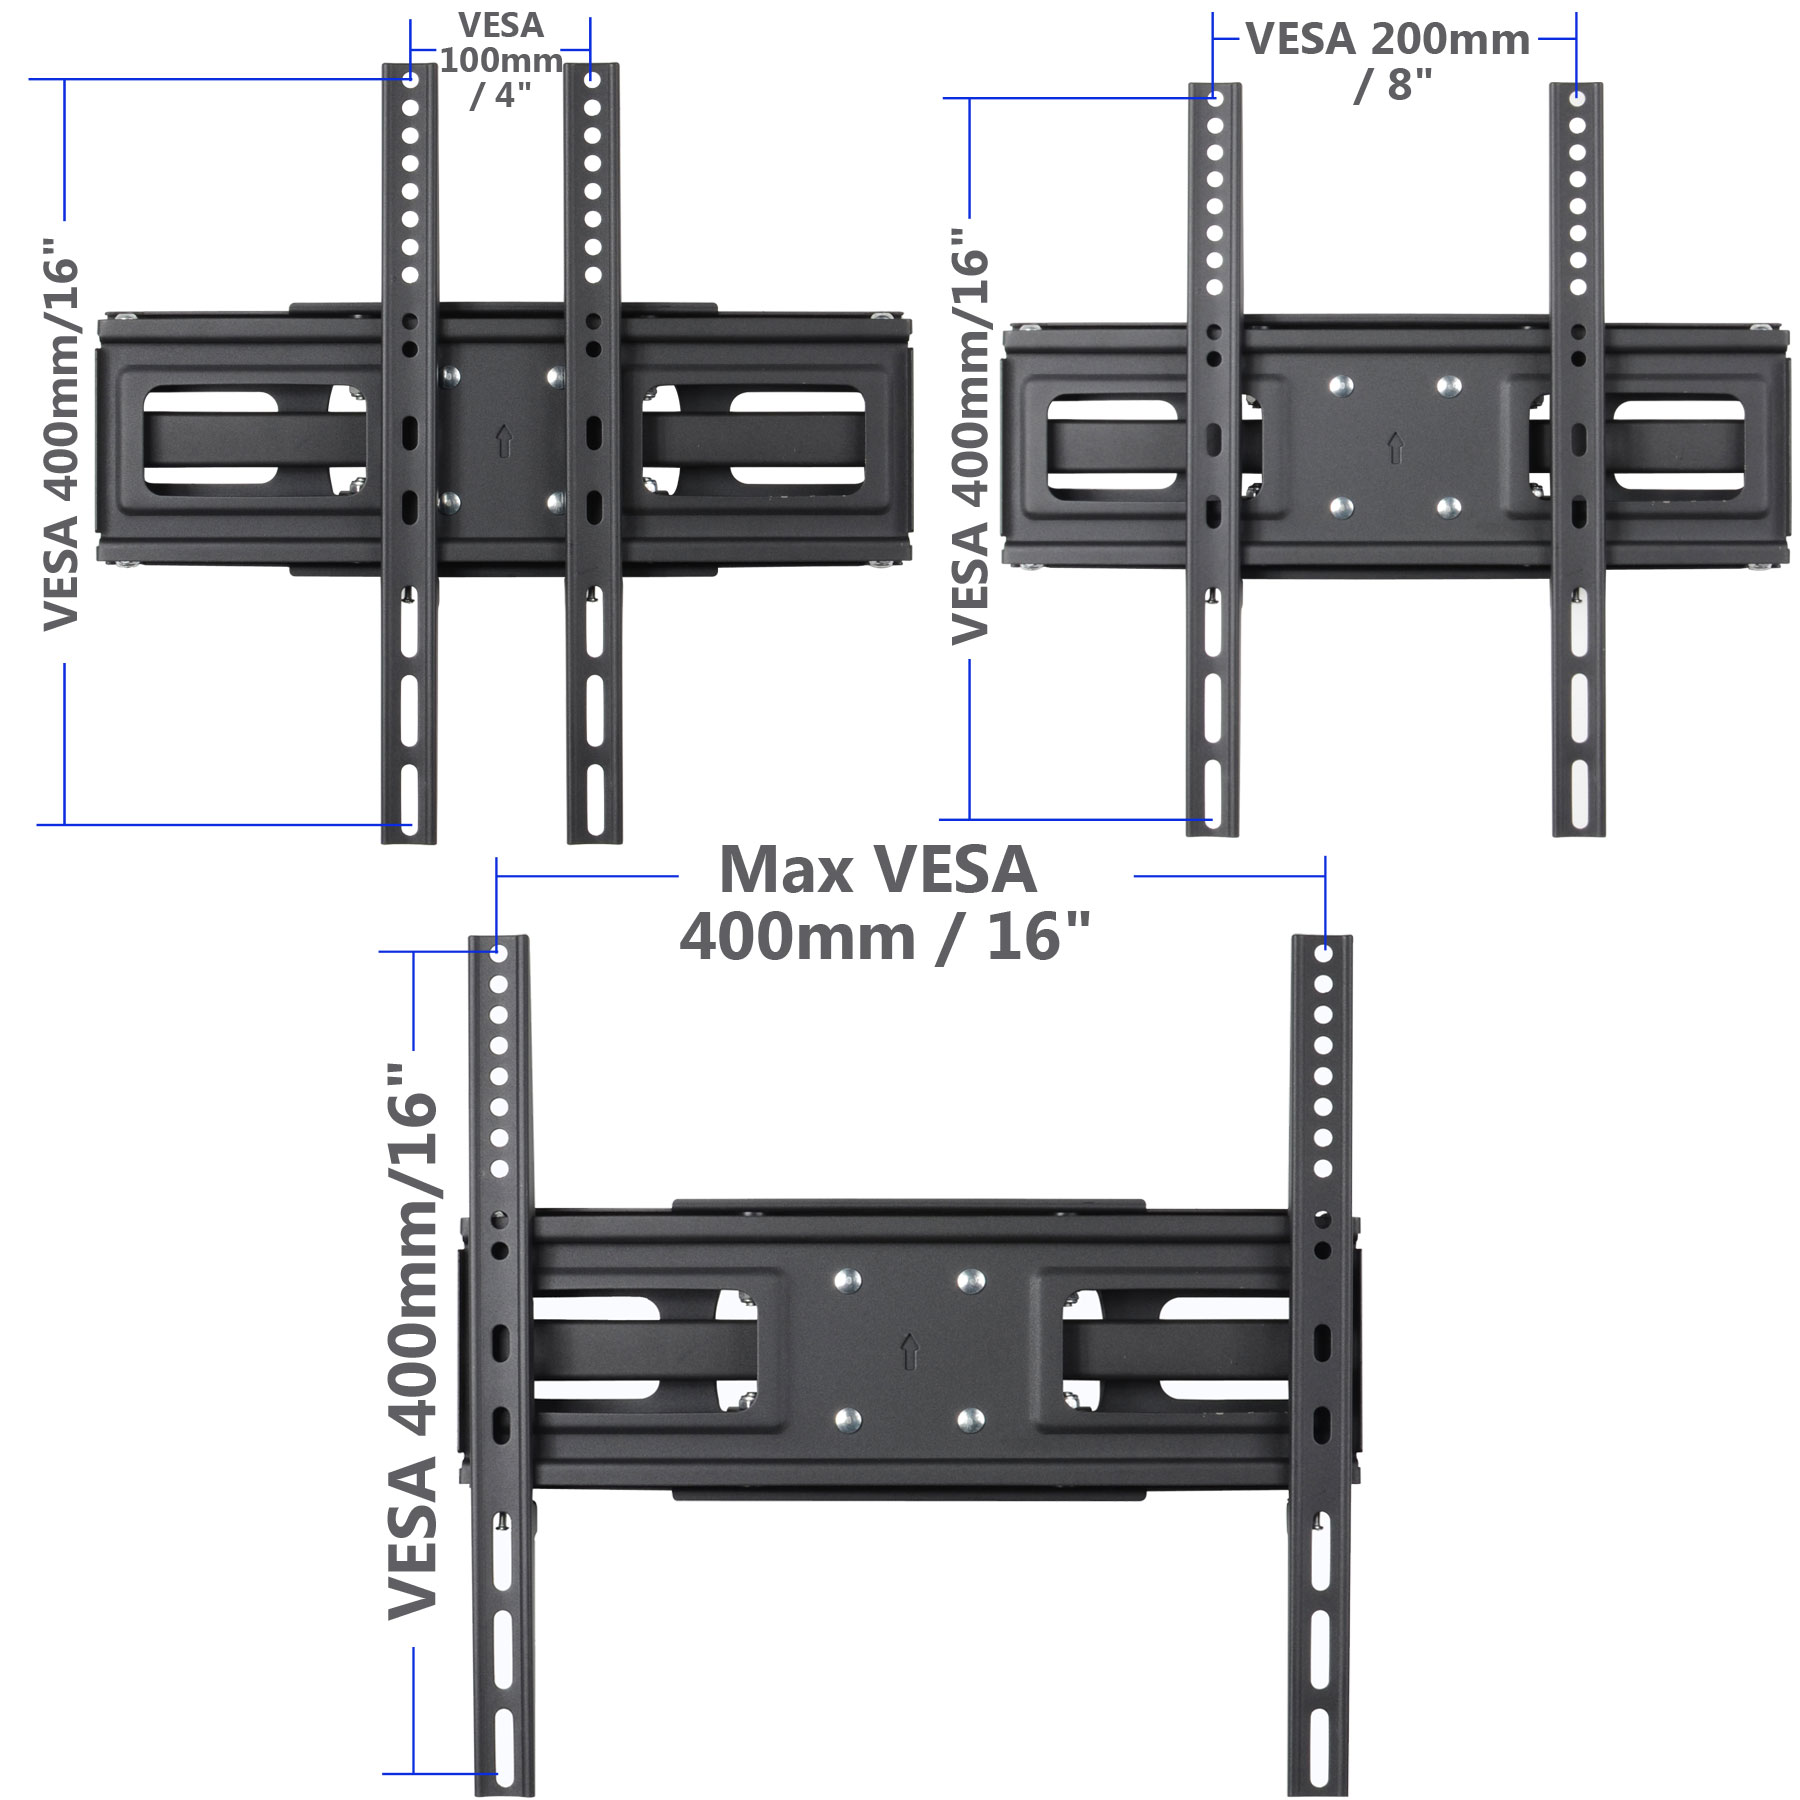 VideoSecu Articulating TV Wall Mount Tilt Swivel Dual Arms Bracket for Most 27 32 39 42 43 46 47 48 50 55 inch LED LCD Plasma HDTV Flat Panel Screen Display, with Full Motion Extend VESA 400x400mm bxk - image 3 of 6